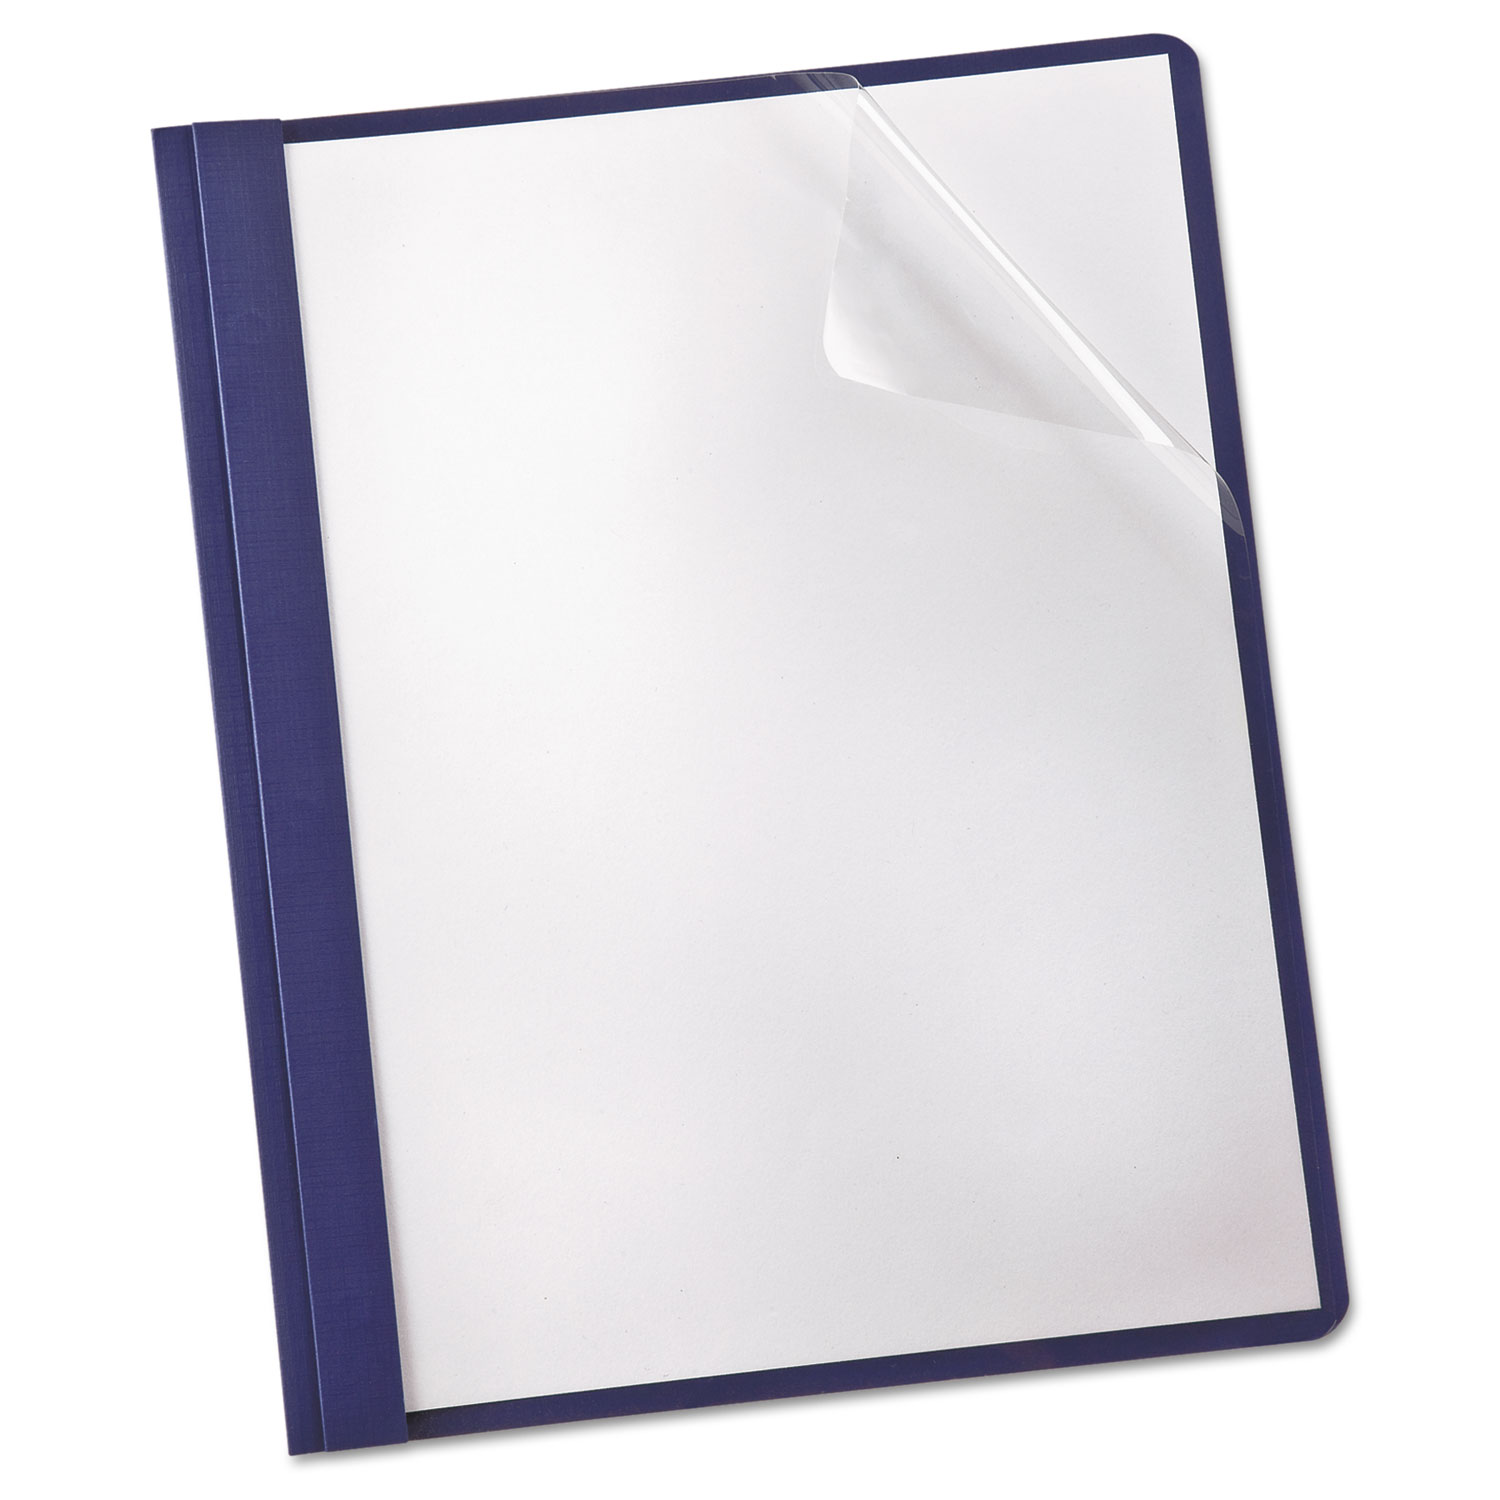 Linen Finish Clear Front Report Cover, 3 Fasteners, Letter, Navy, 25/Box